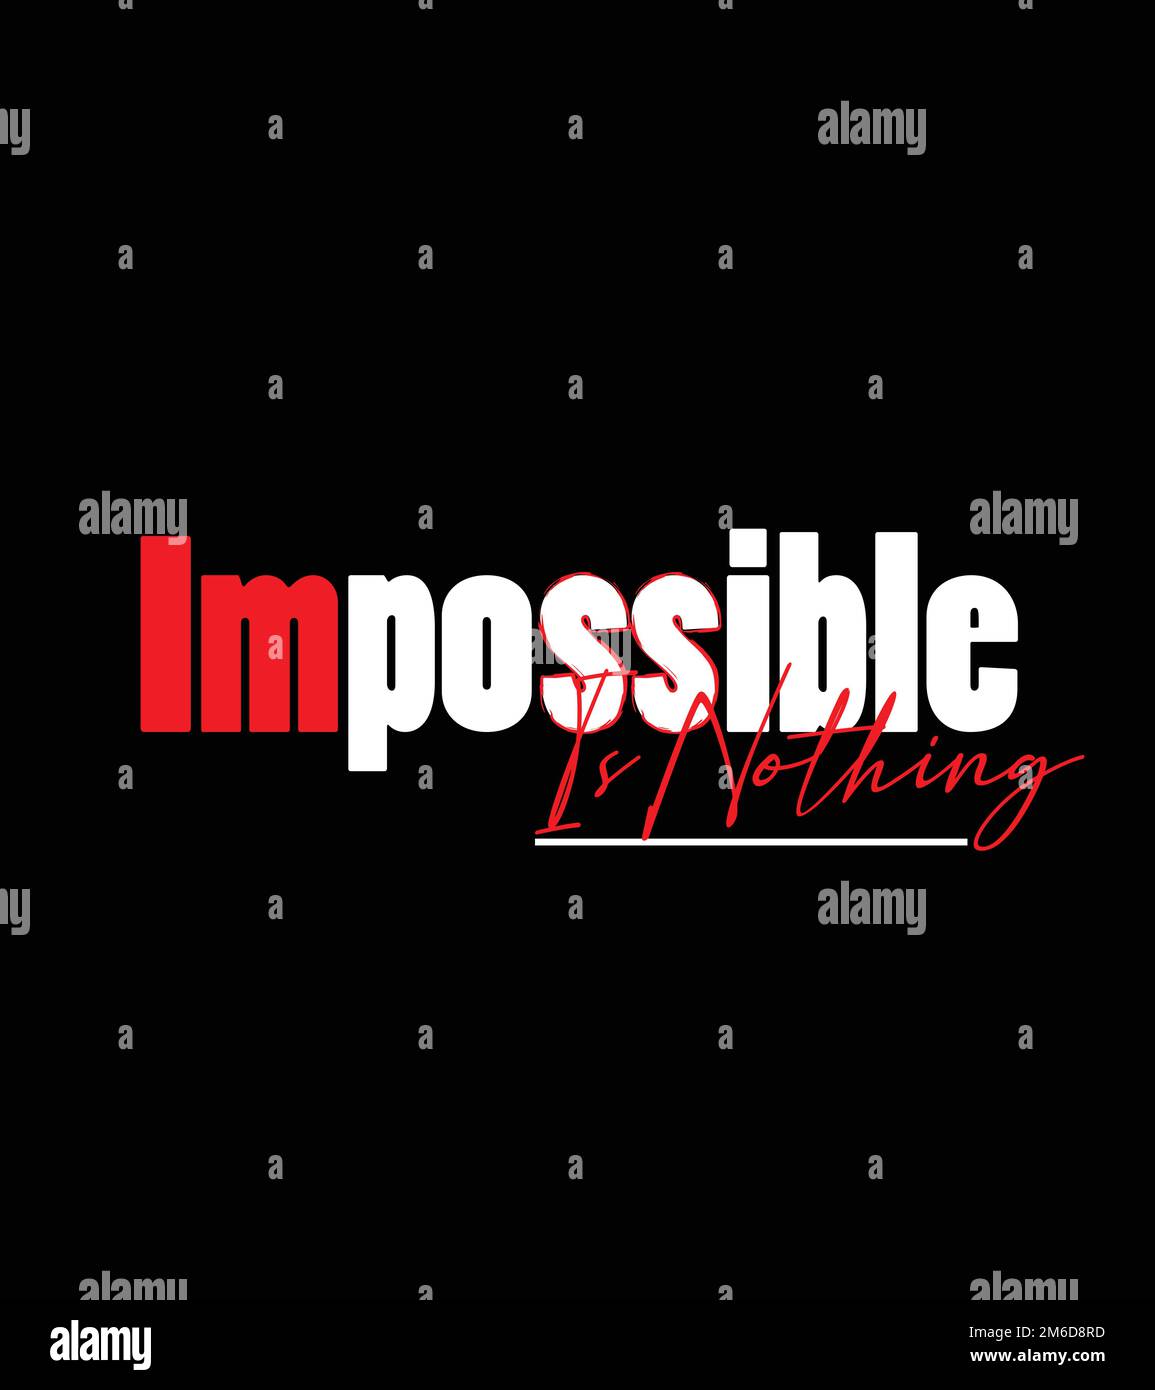 Impossible Is Nothing Modern and Stylish Motivational Quotes Typography Slogan Stock Vector